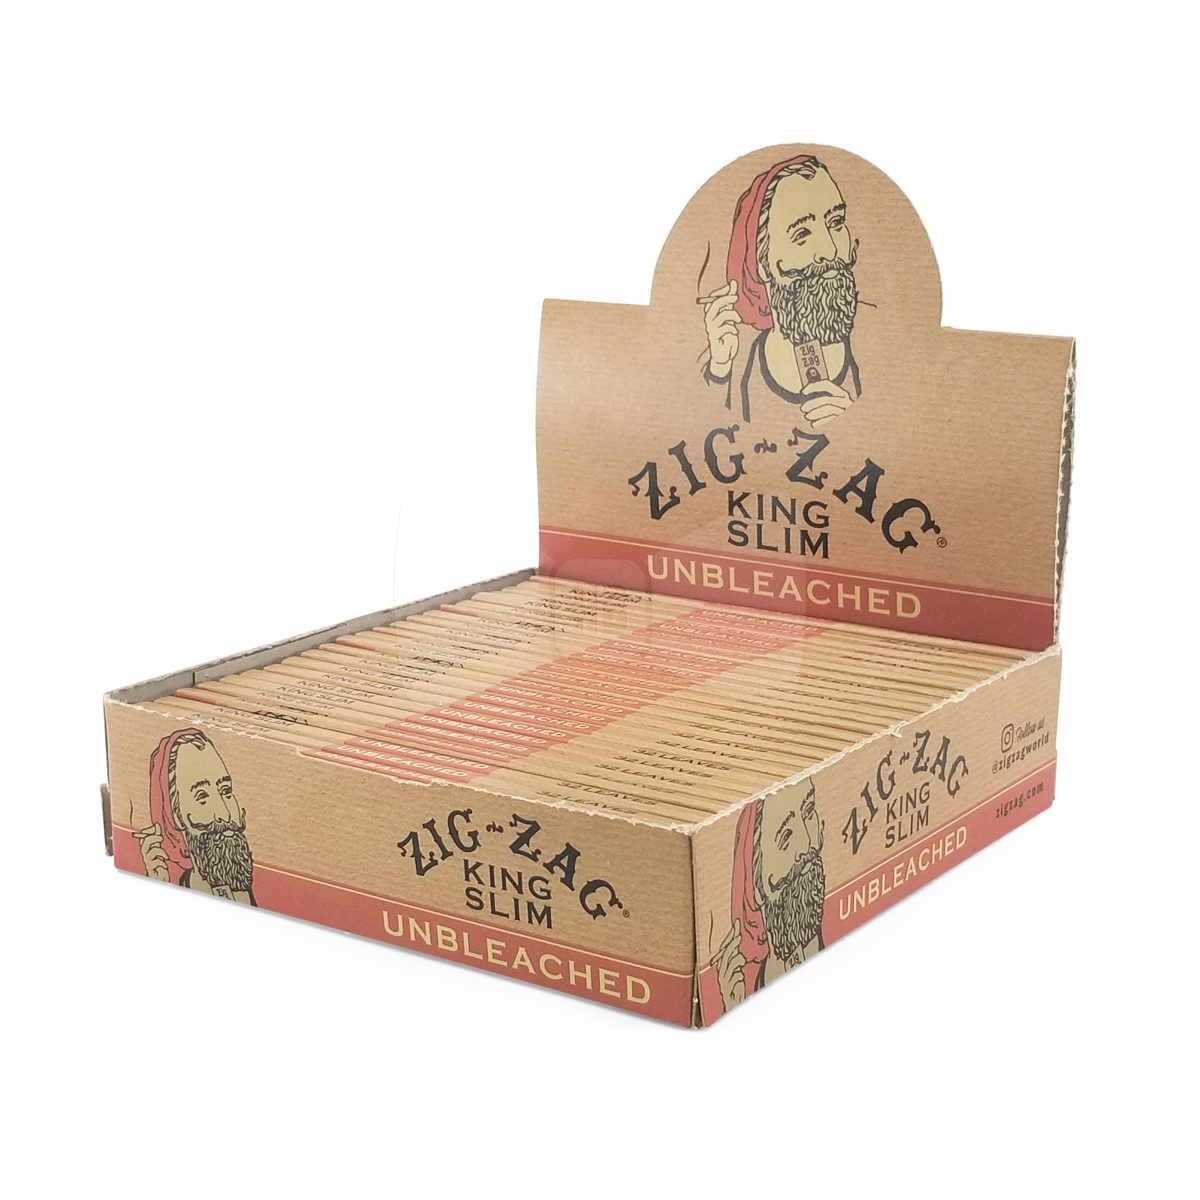 Zig Zag Unbleached King Size Papers Full Box (24 Packs)